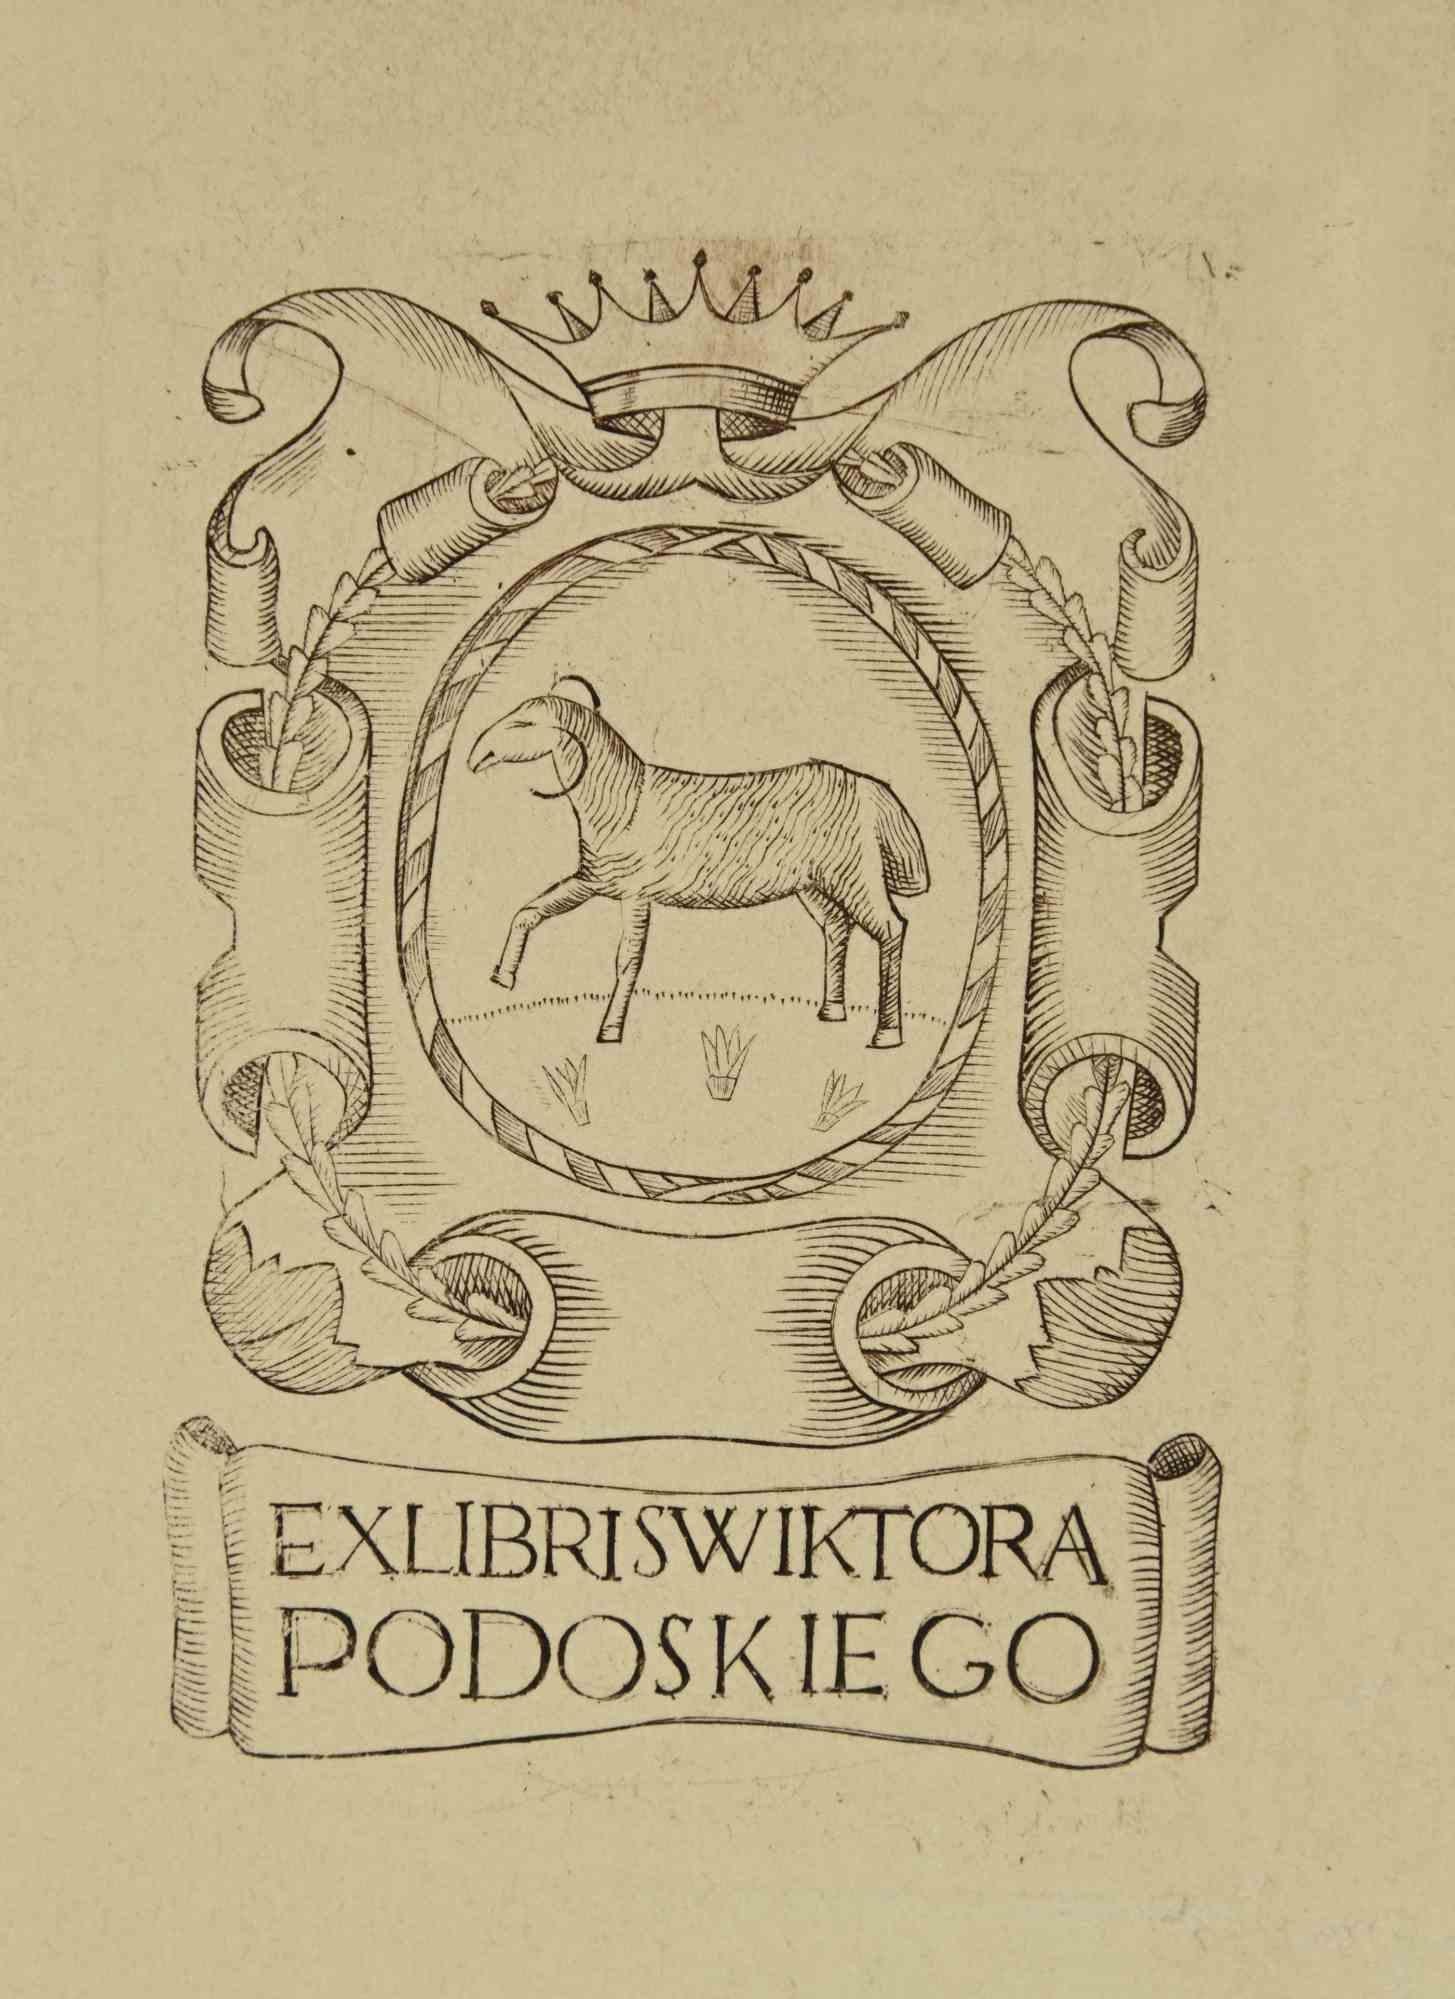 Ex libris - Wiktora Podoski Ego is an Artwork realized in 1930s, by the Artist  Wiktor Podoski (1901-1970).

Woodcut print on ivory paper. Hand Signed on back. Good conditions.

The artwork represents a minimalistic, clean design, through